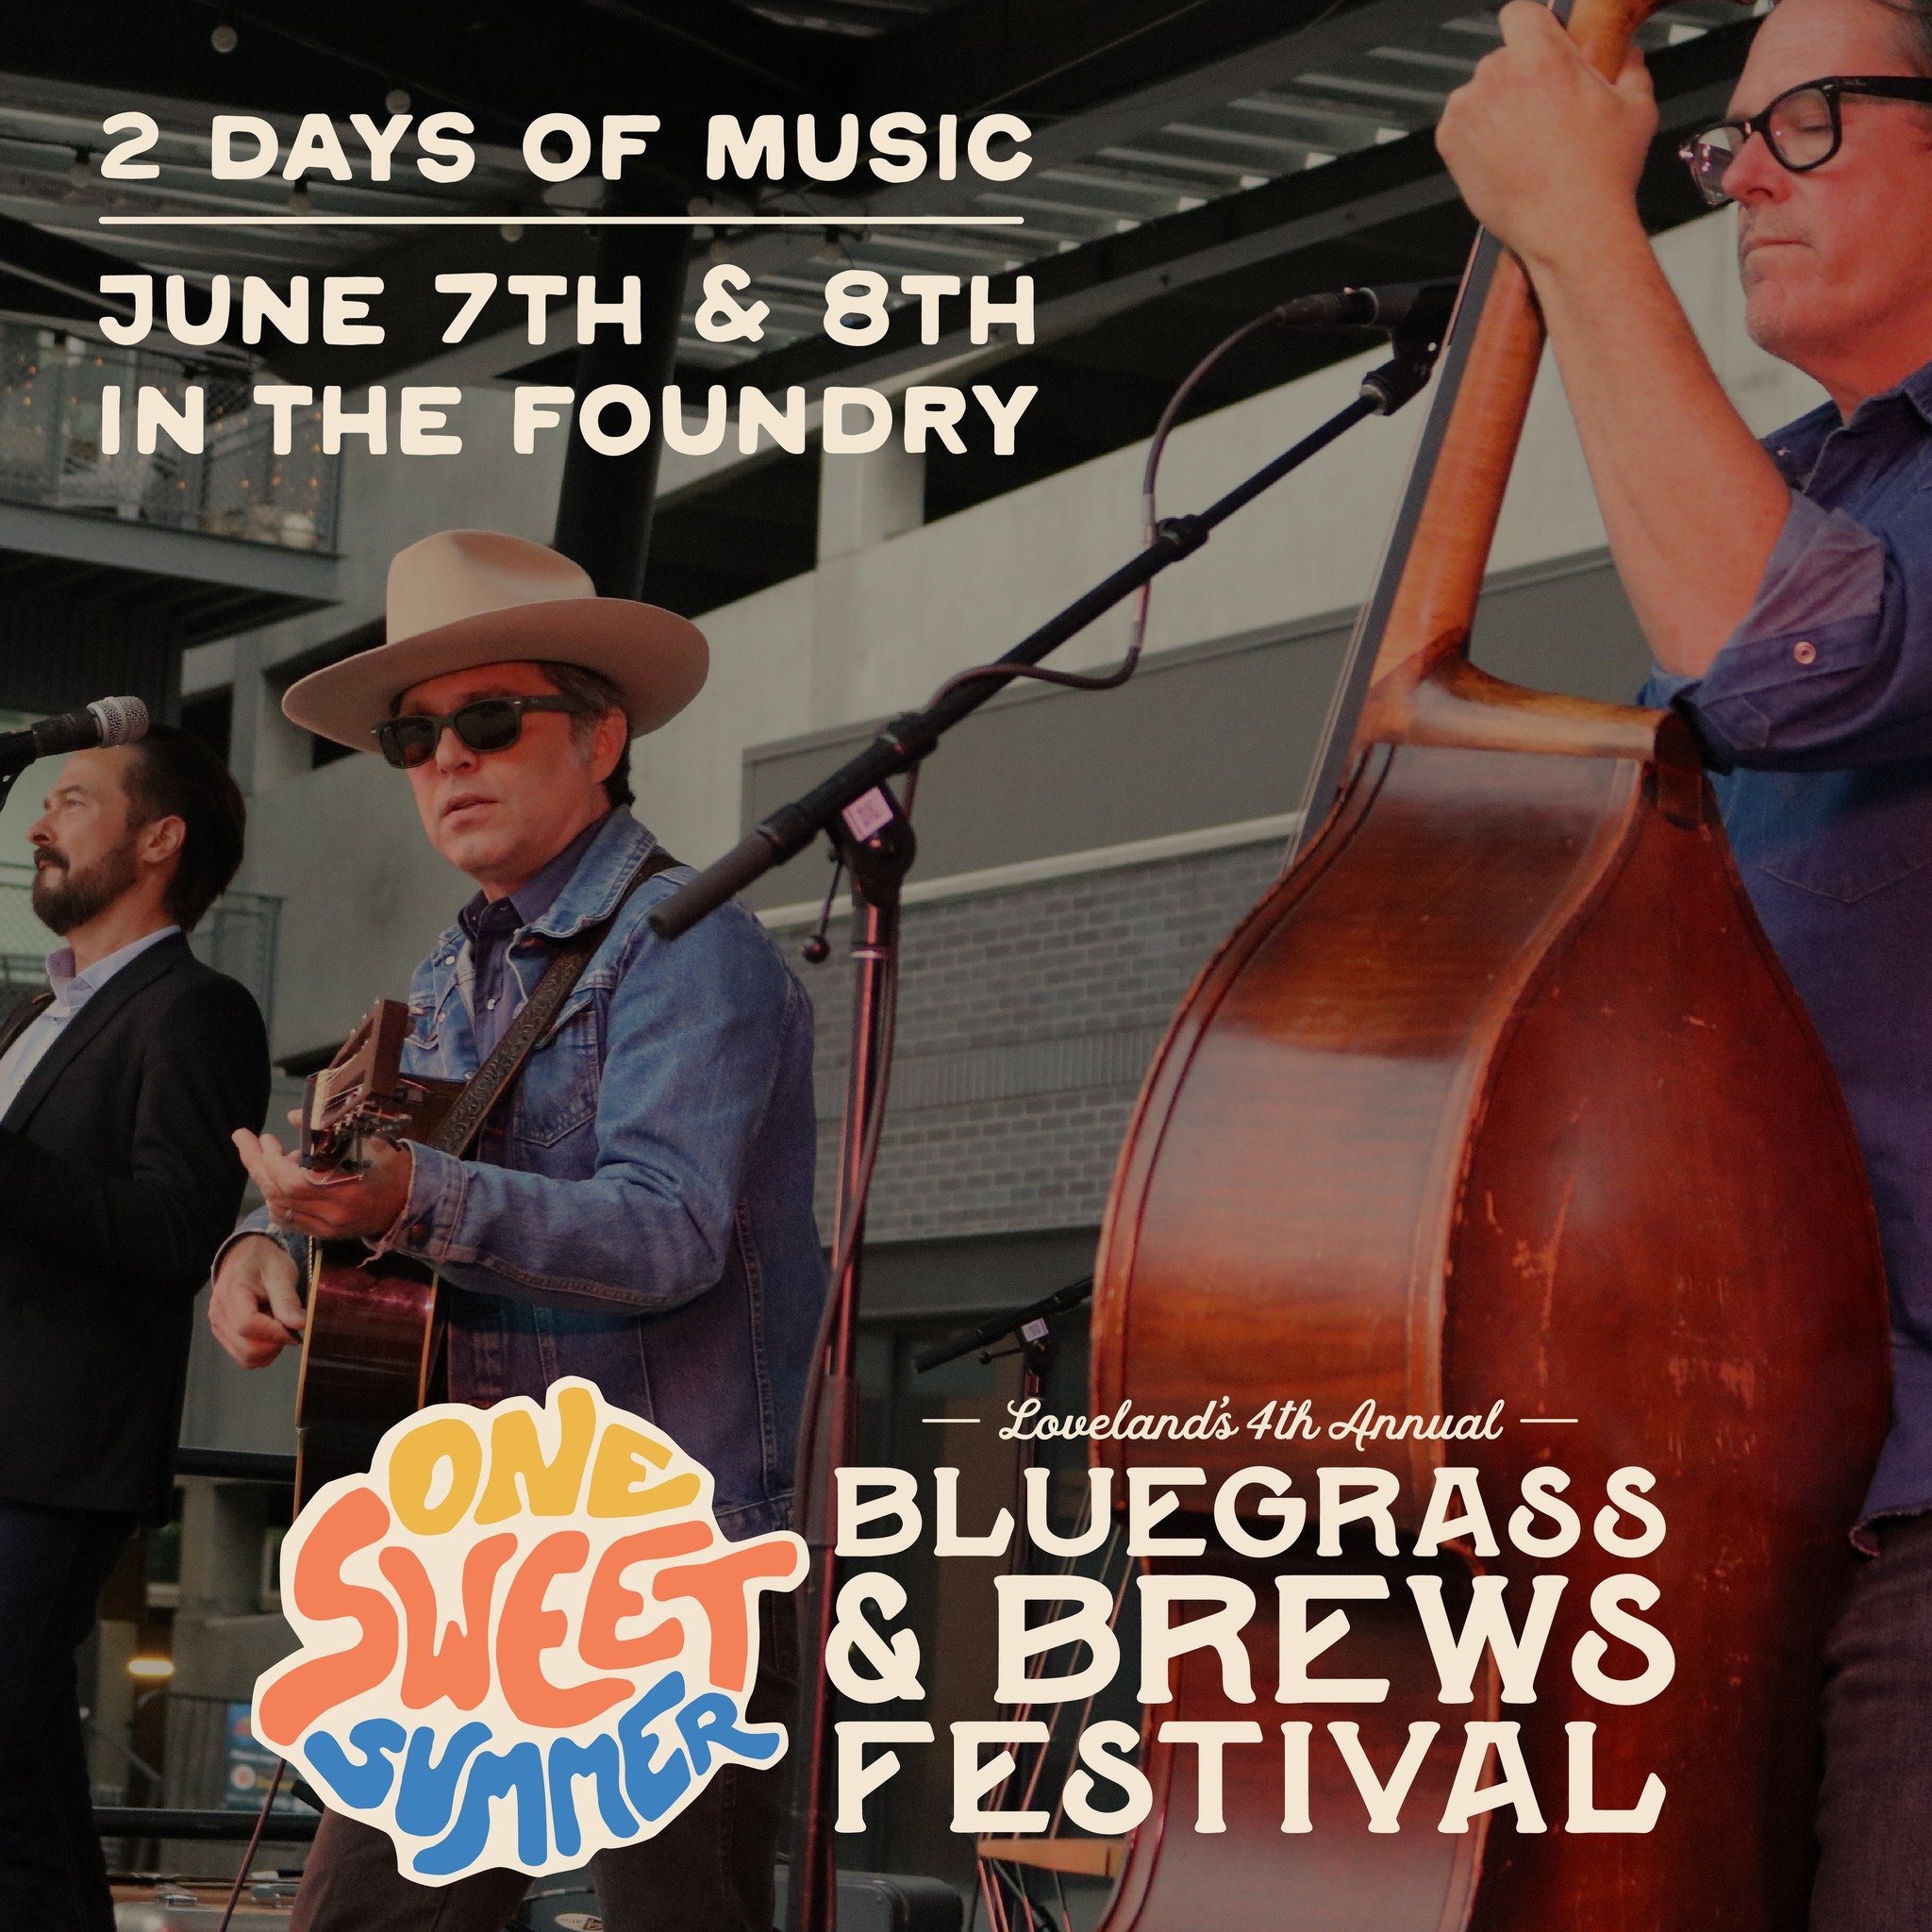 Mark your calendars for June 7th and 8th for our 4th Annual Bluegrass and Brews Festival! We are SO EXCITED for this years' talented lineup - more details to come! 

Friday, June 7th 
6:00 - 9:30pm 

Saturday, June 8th
1:00 - 9:30pm 

#loveland #down